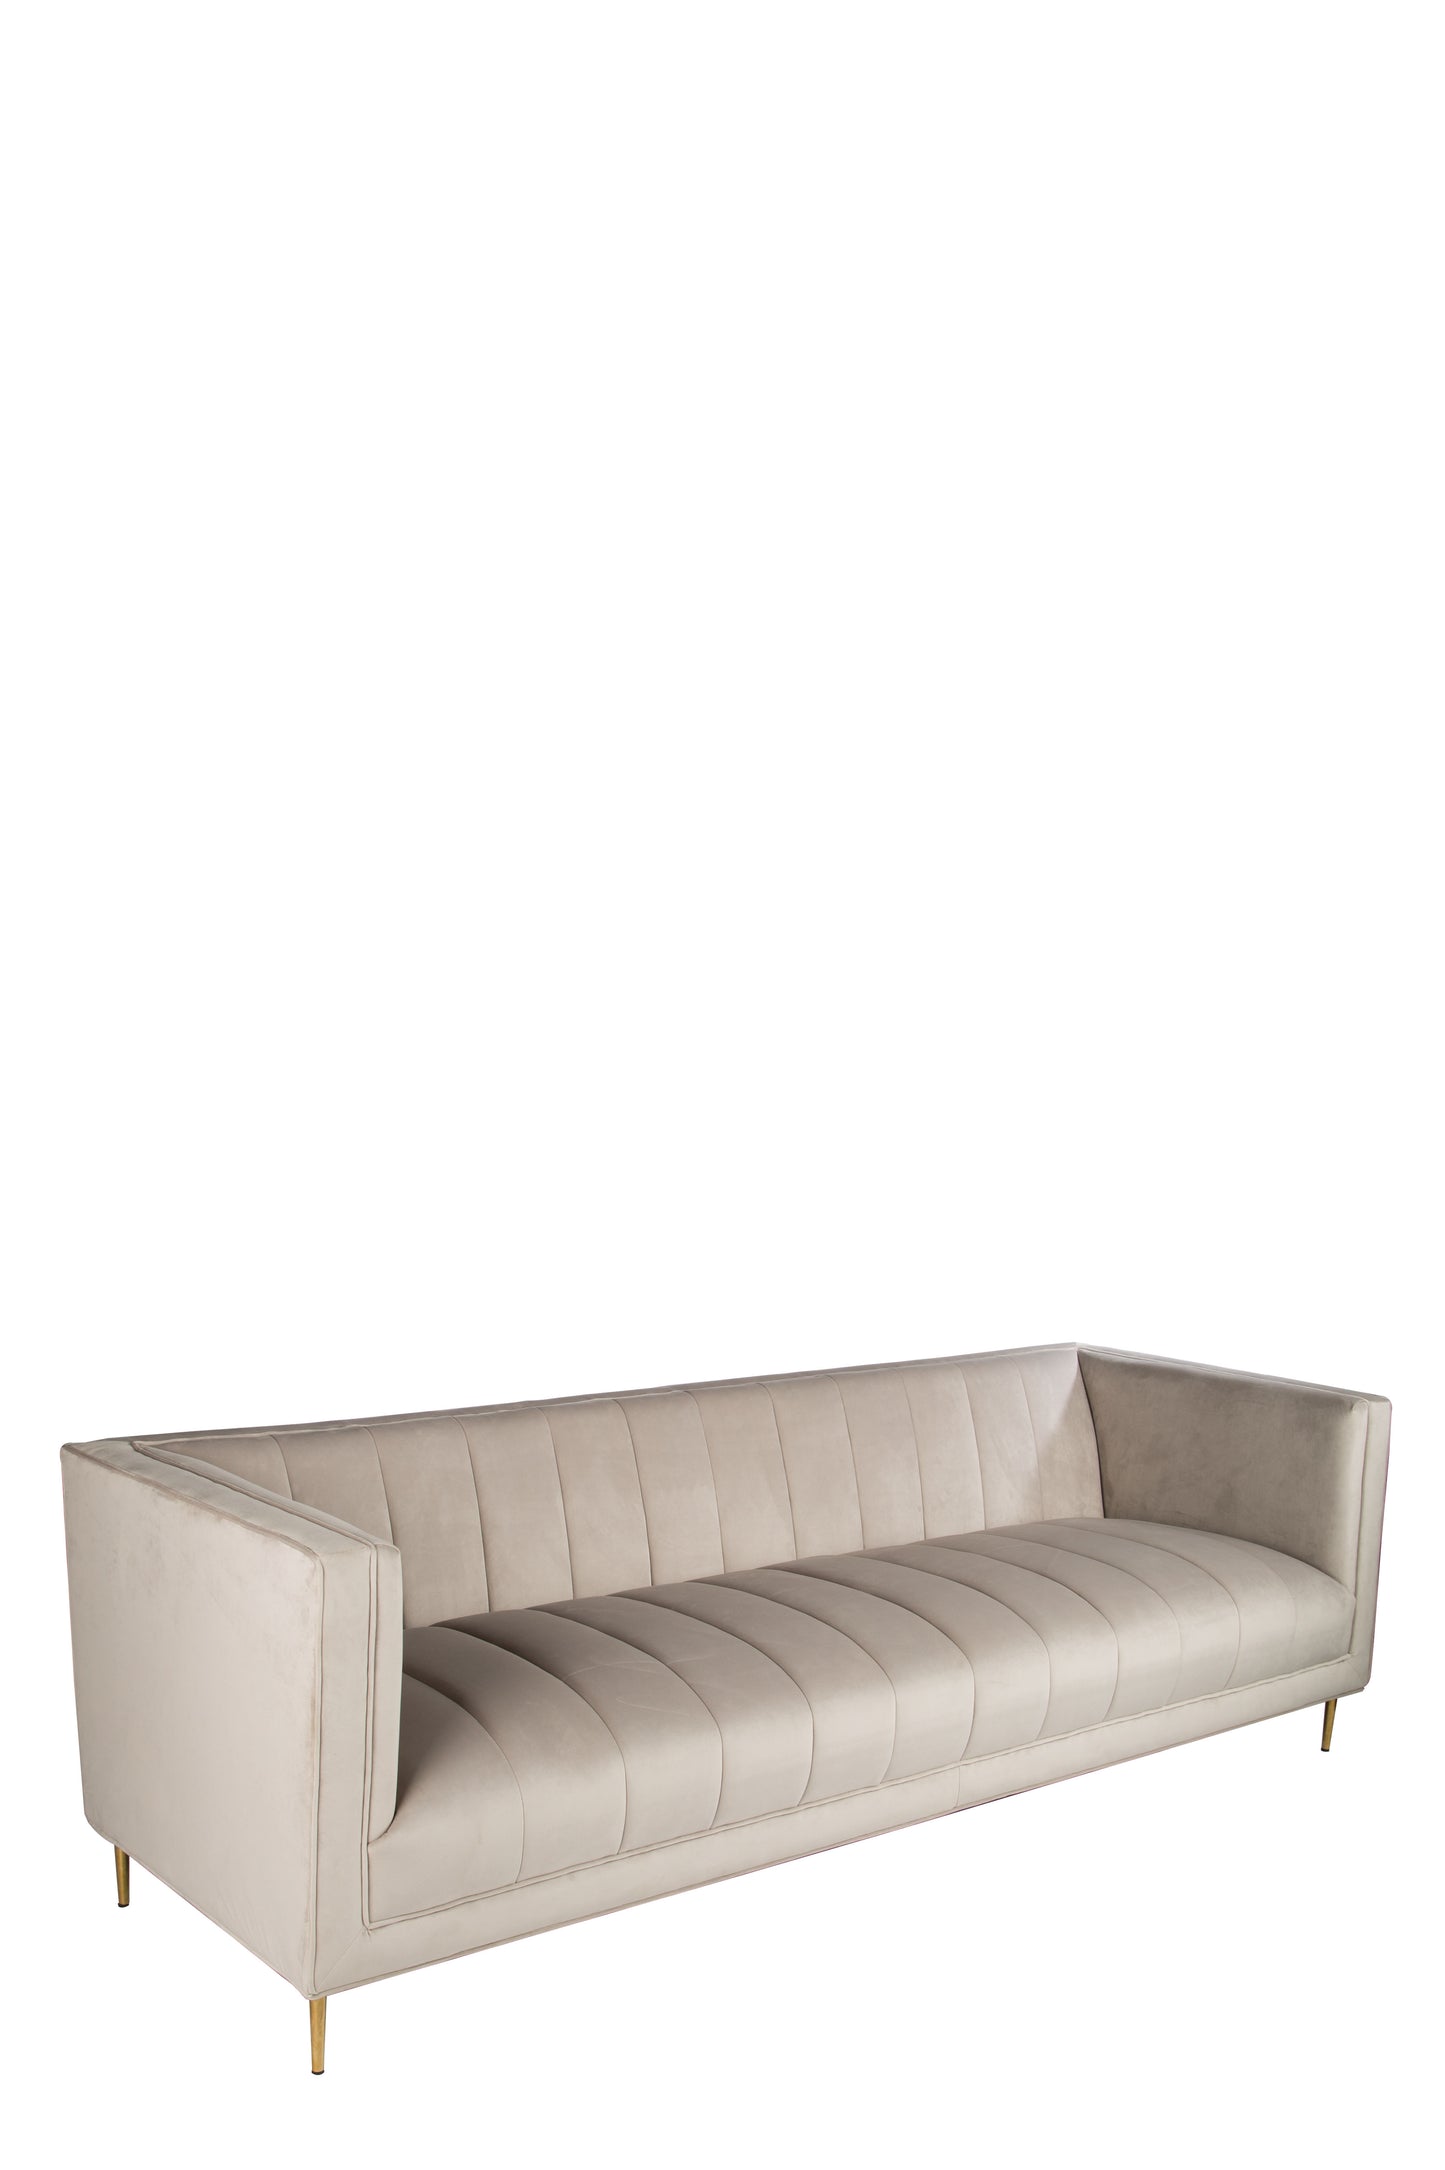 channel tufted gray sofa